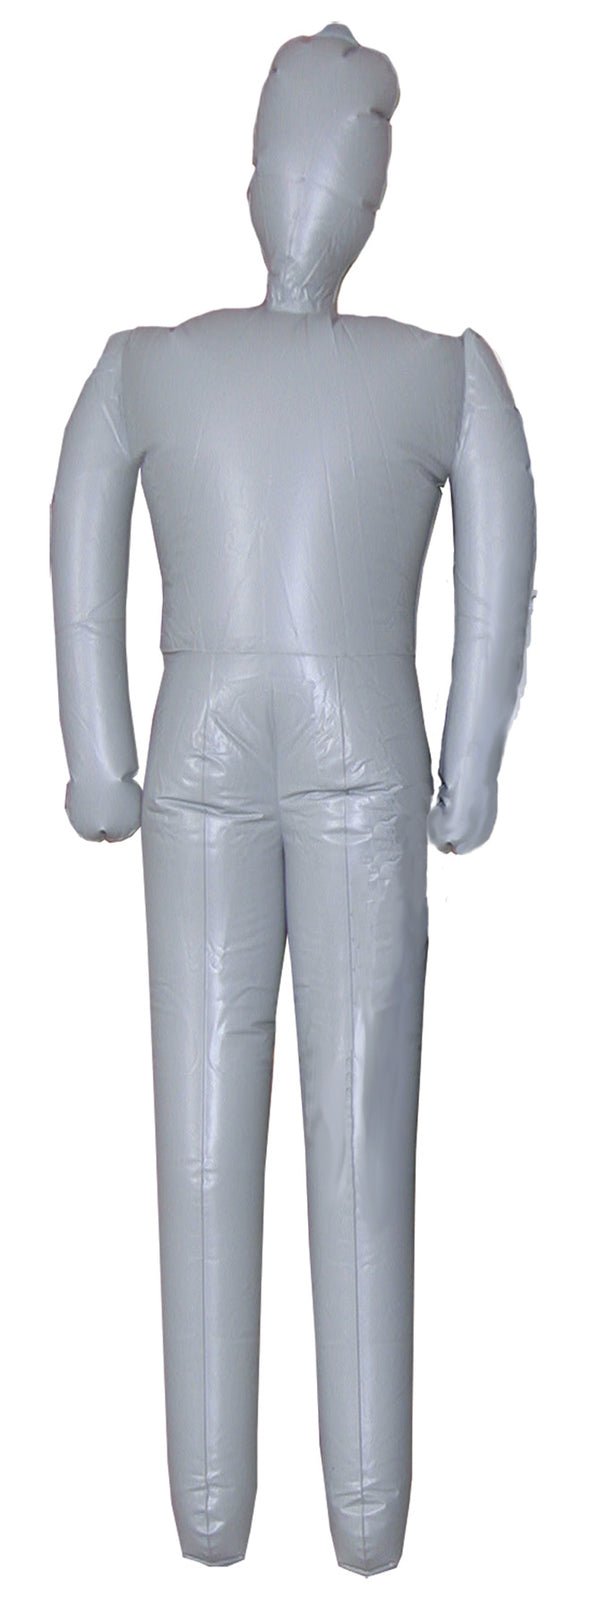 Inflatable Blow Up Mannequin Body, 72 In Tall Prop